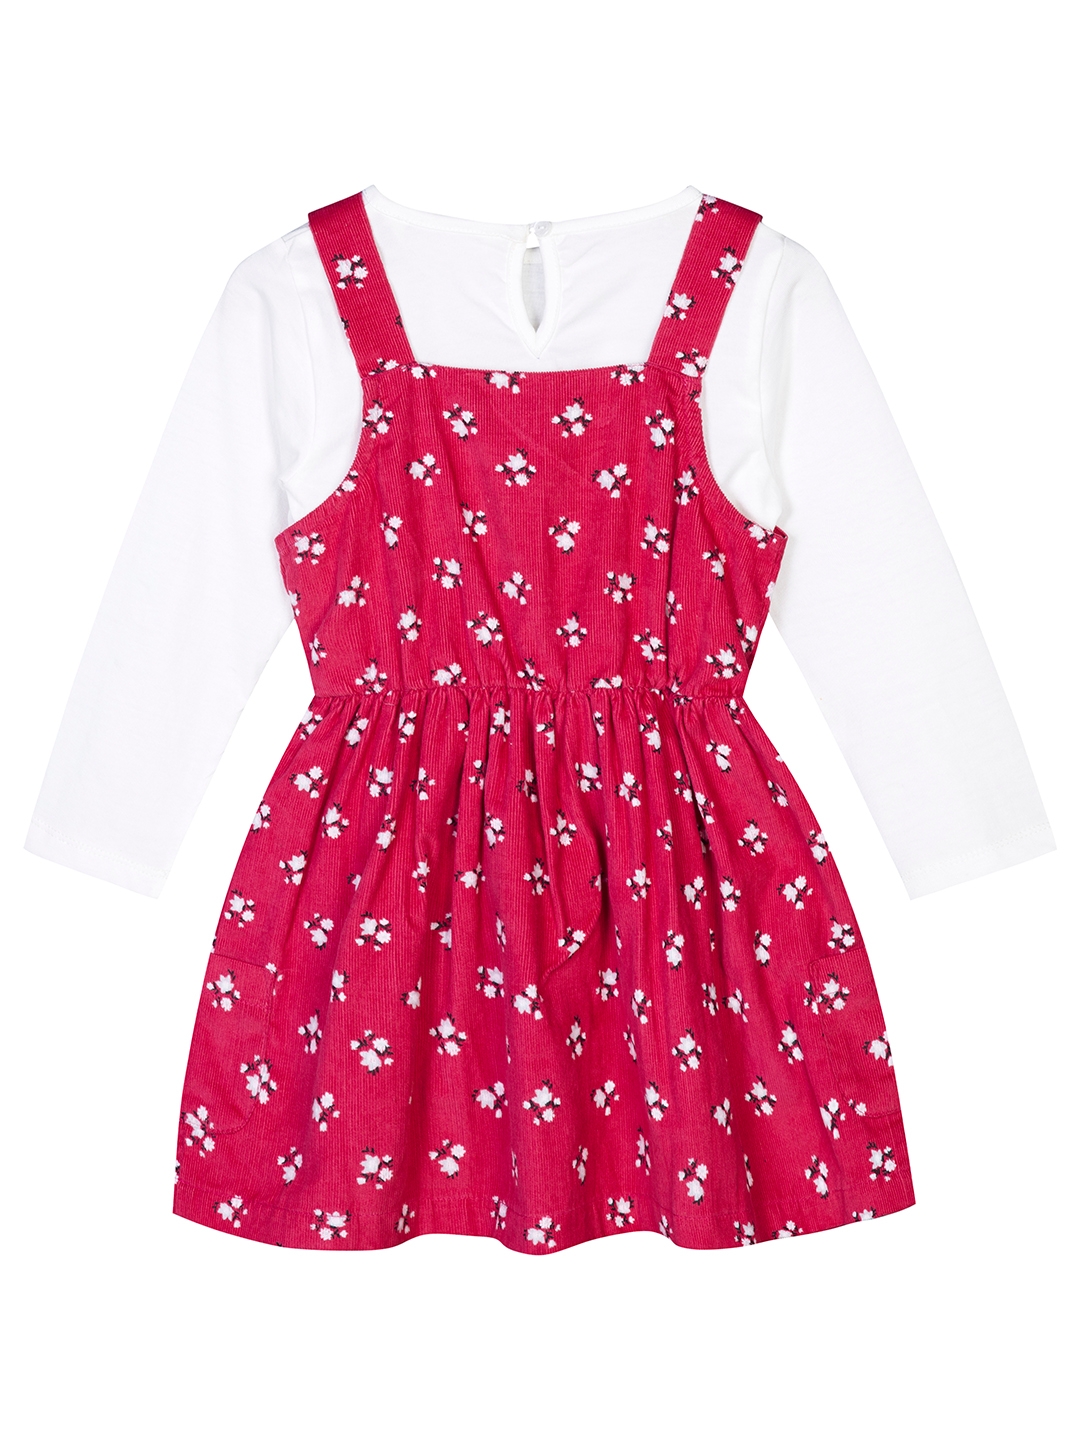 Budding Bees Girls Corudroy Printed Dungaree Dress with T-Shirt Set-Red